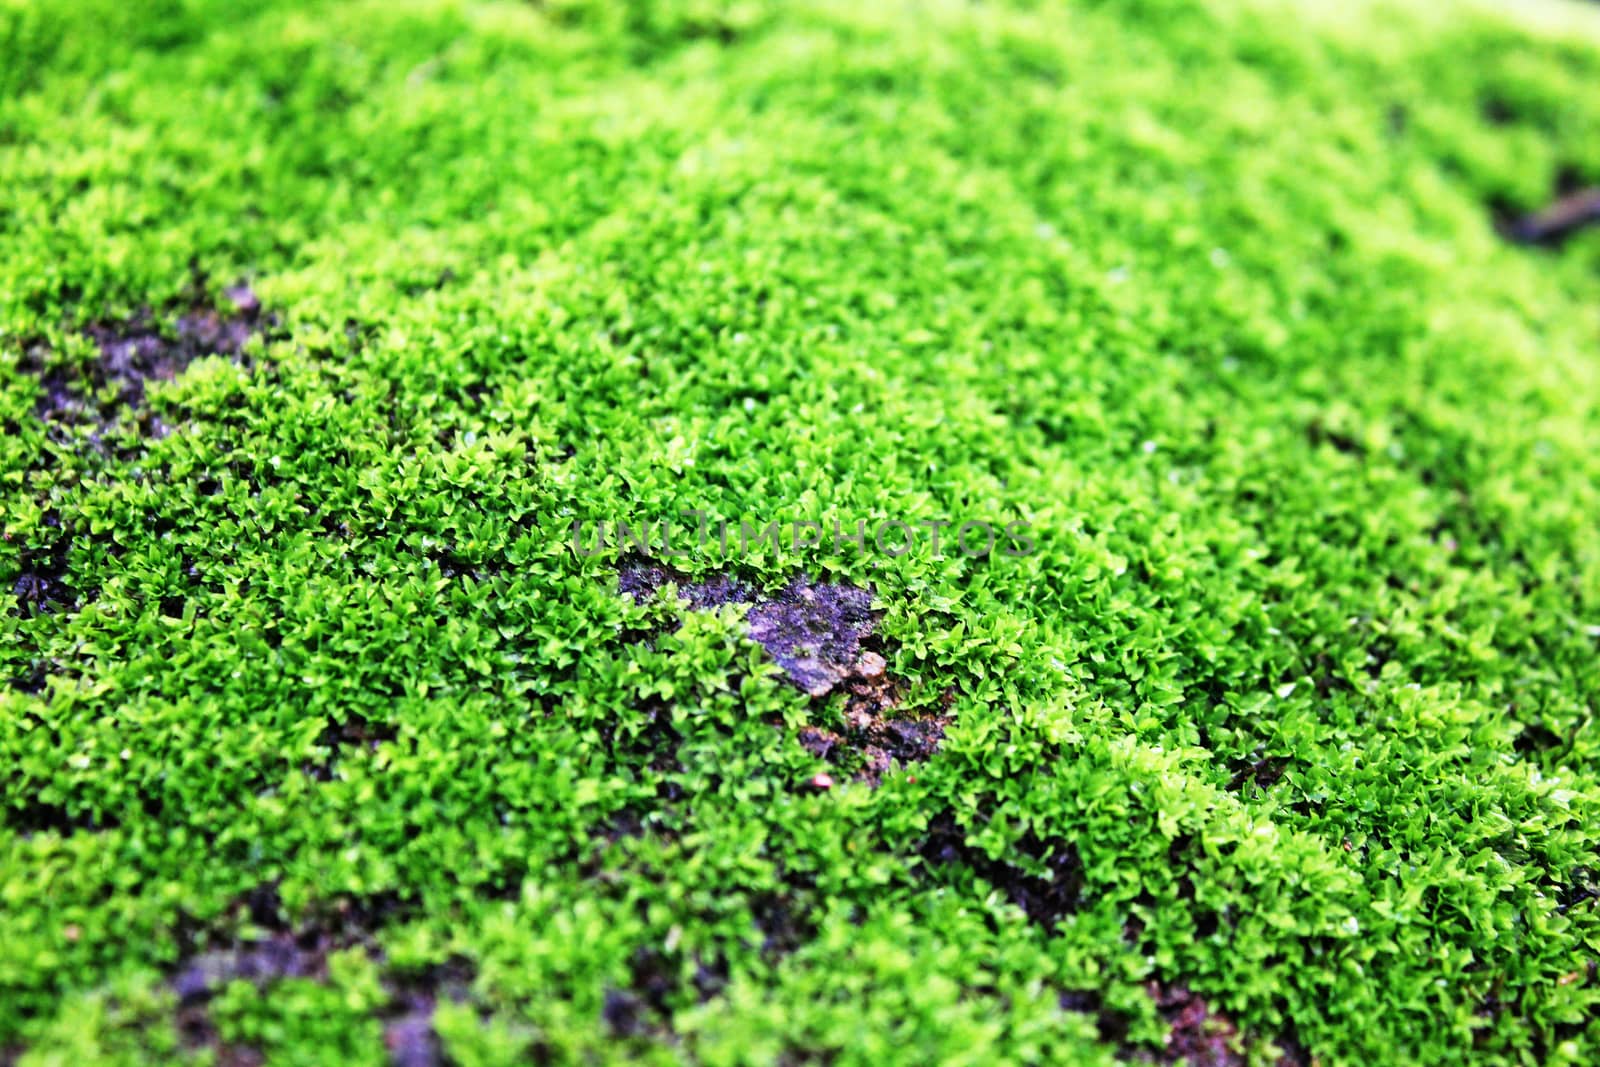 Green moss on the rocks on the ground, growing on humid ground.